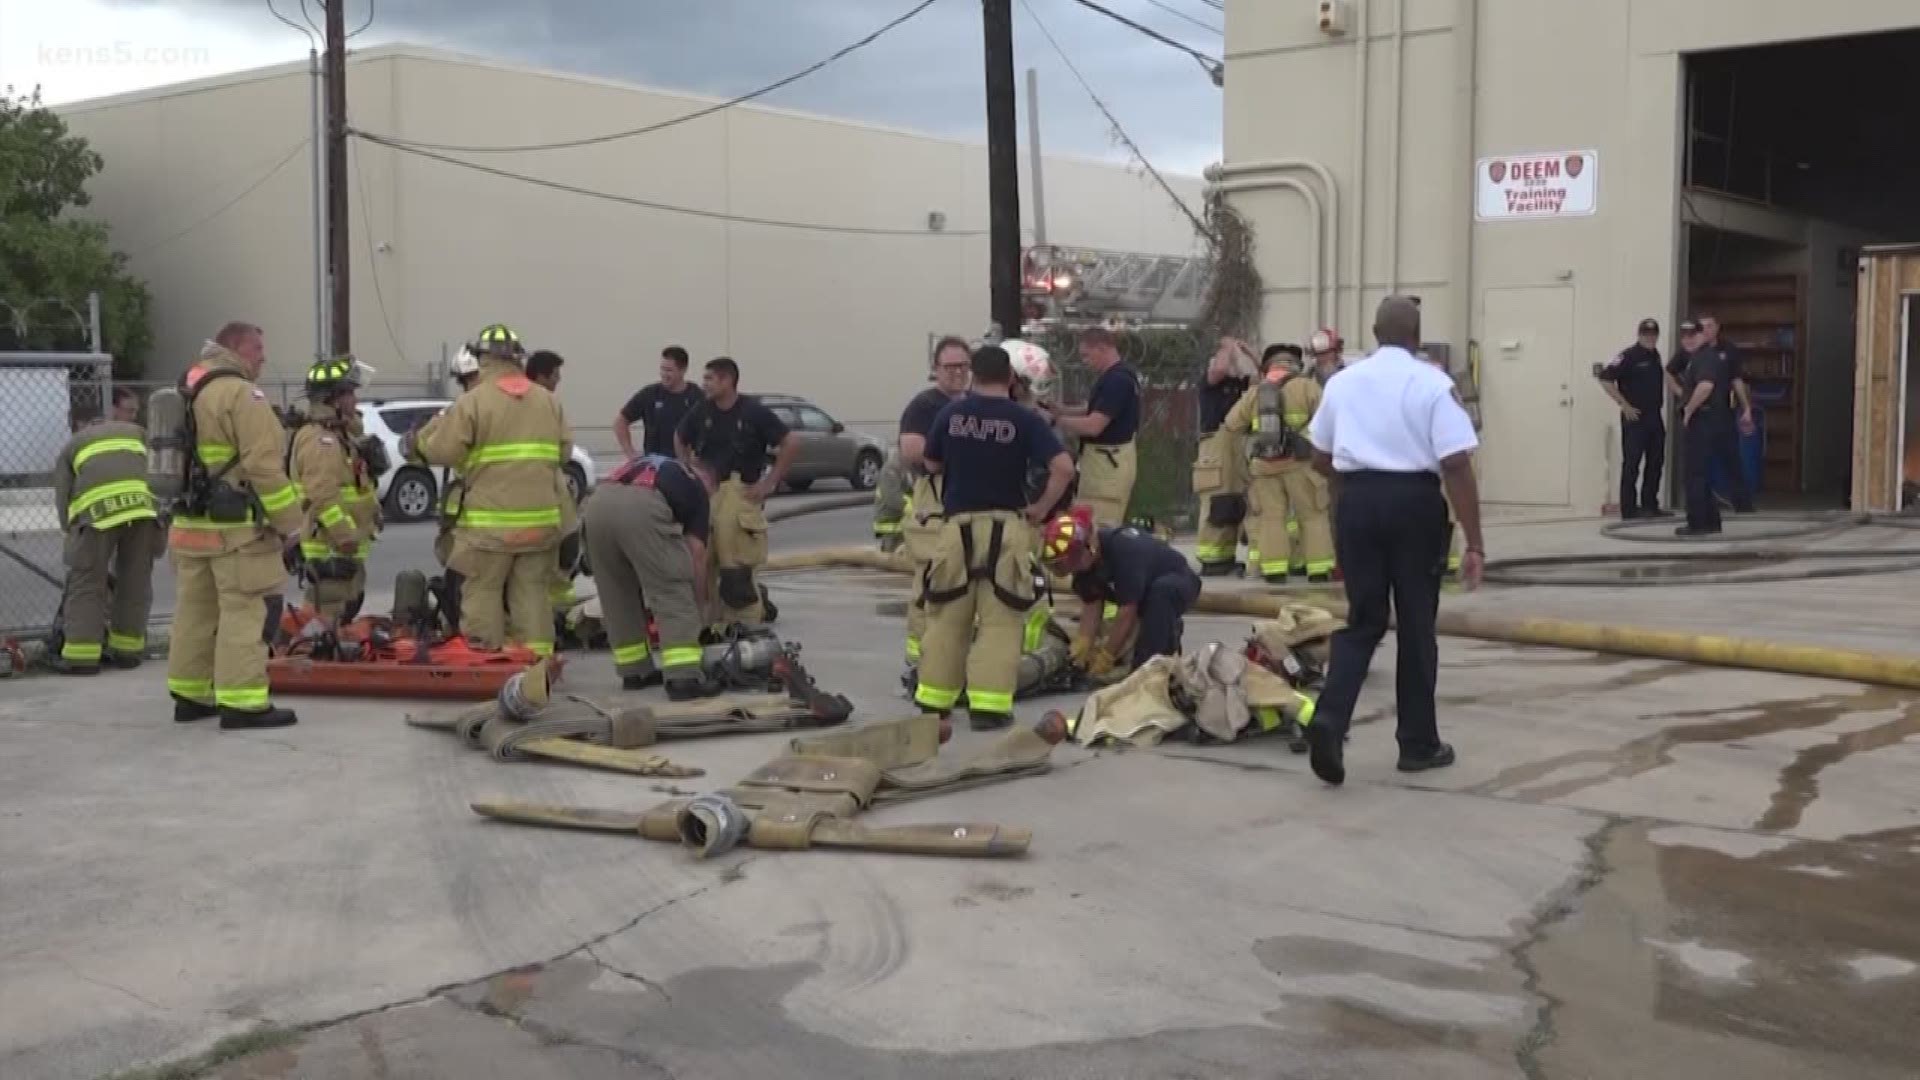 A new training facility for San Antonio firefighters is named after fallen firefighter Scott Deem. Eyewitness News reporter Leah Durain has more.